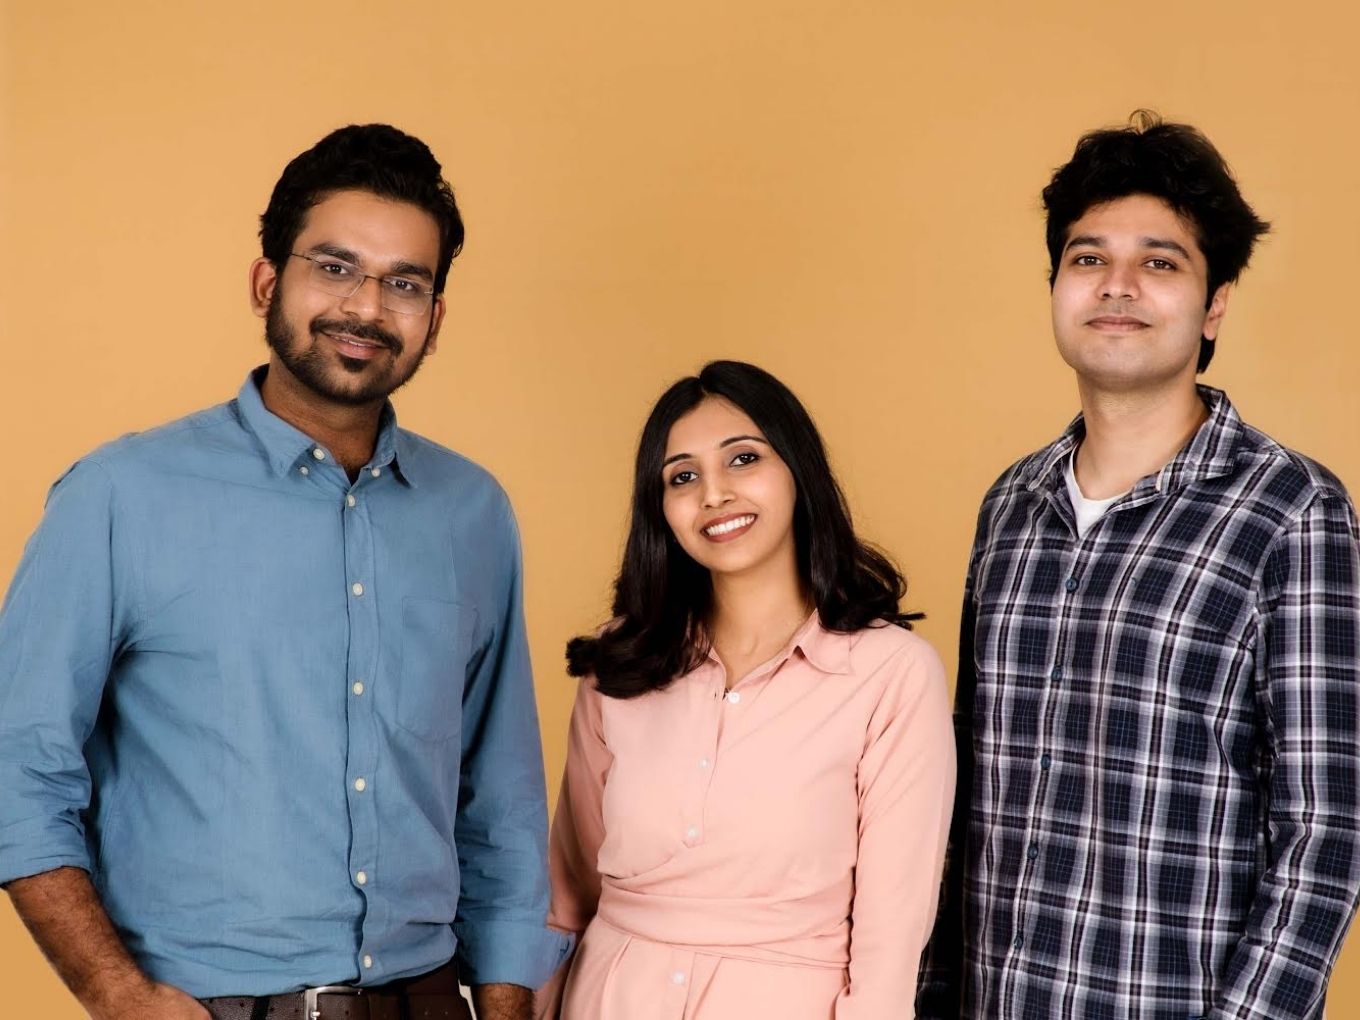 Jewellery Startup GIVA Raises $10 Mn To Meet Global Expansion Plans Summary GIVA offers a range of silver,18K gold, rose gold and oxidised silver jewellery India is the largest producer of silver jewellery in the world by some margin, accounting for 35% of the total fabrication India is also the largest consumer of silver in the world Bengaluru-based D2C jewellery startup GIVA has raised $10 Mn in a Series A round from Sixth Sense Ventures, A91 Partners and others including India Quotient, Grand Anicut Angel Fund, and Founder’s Bank Capital.